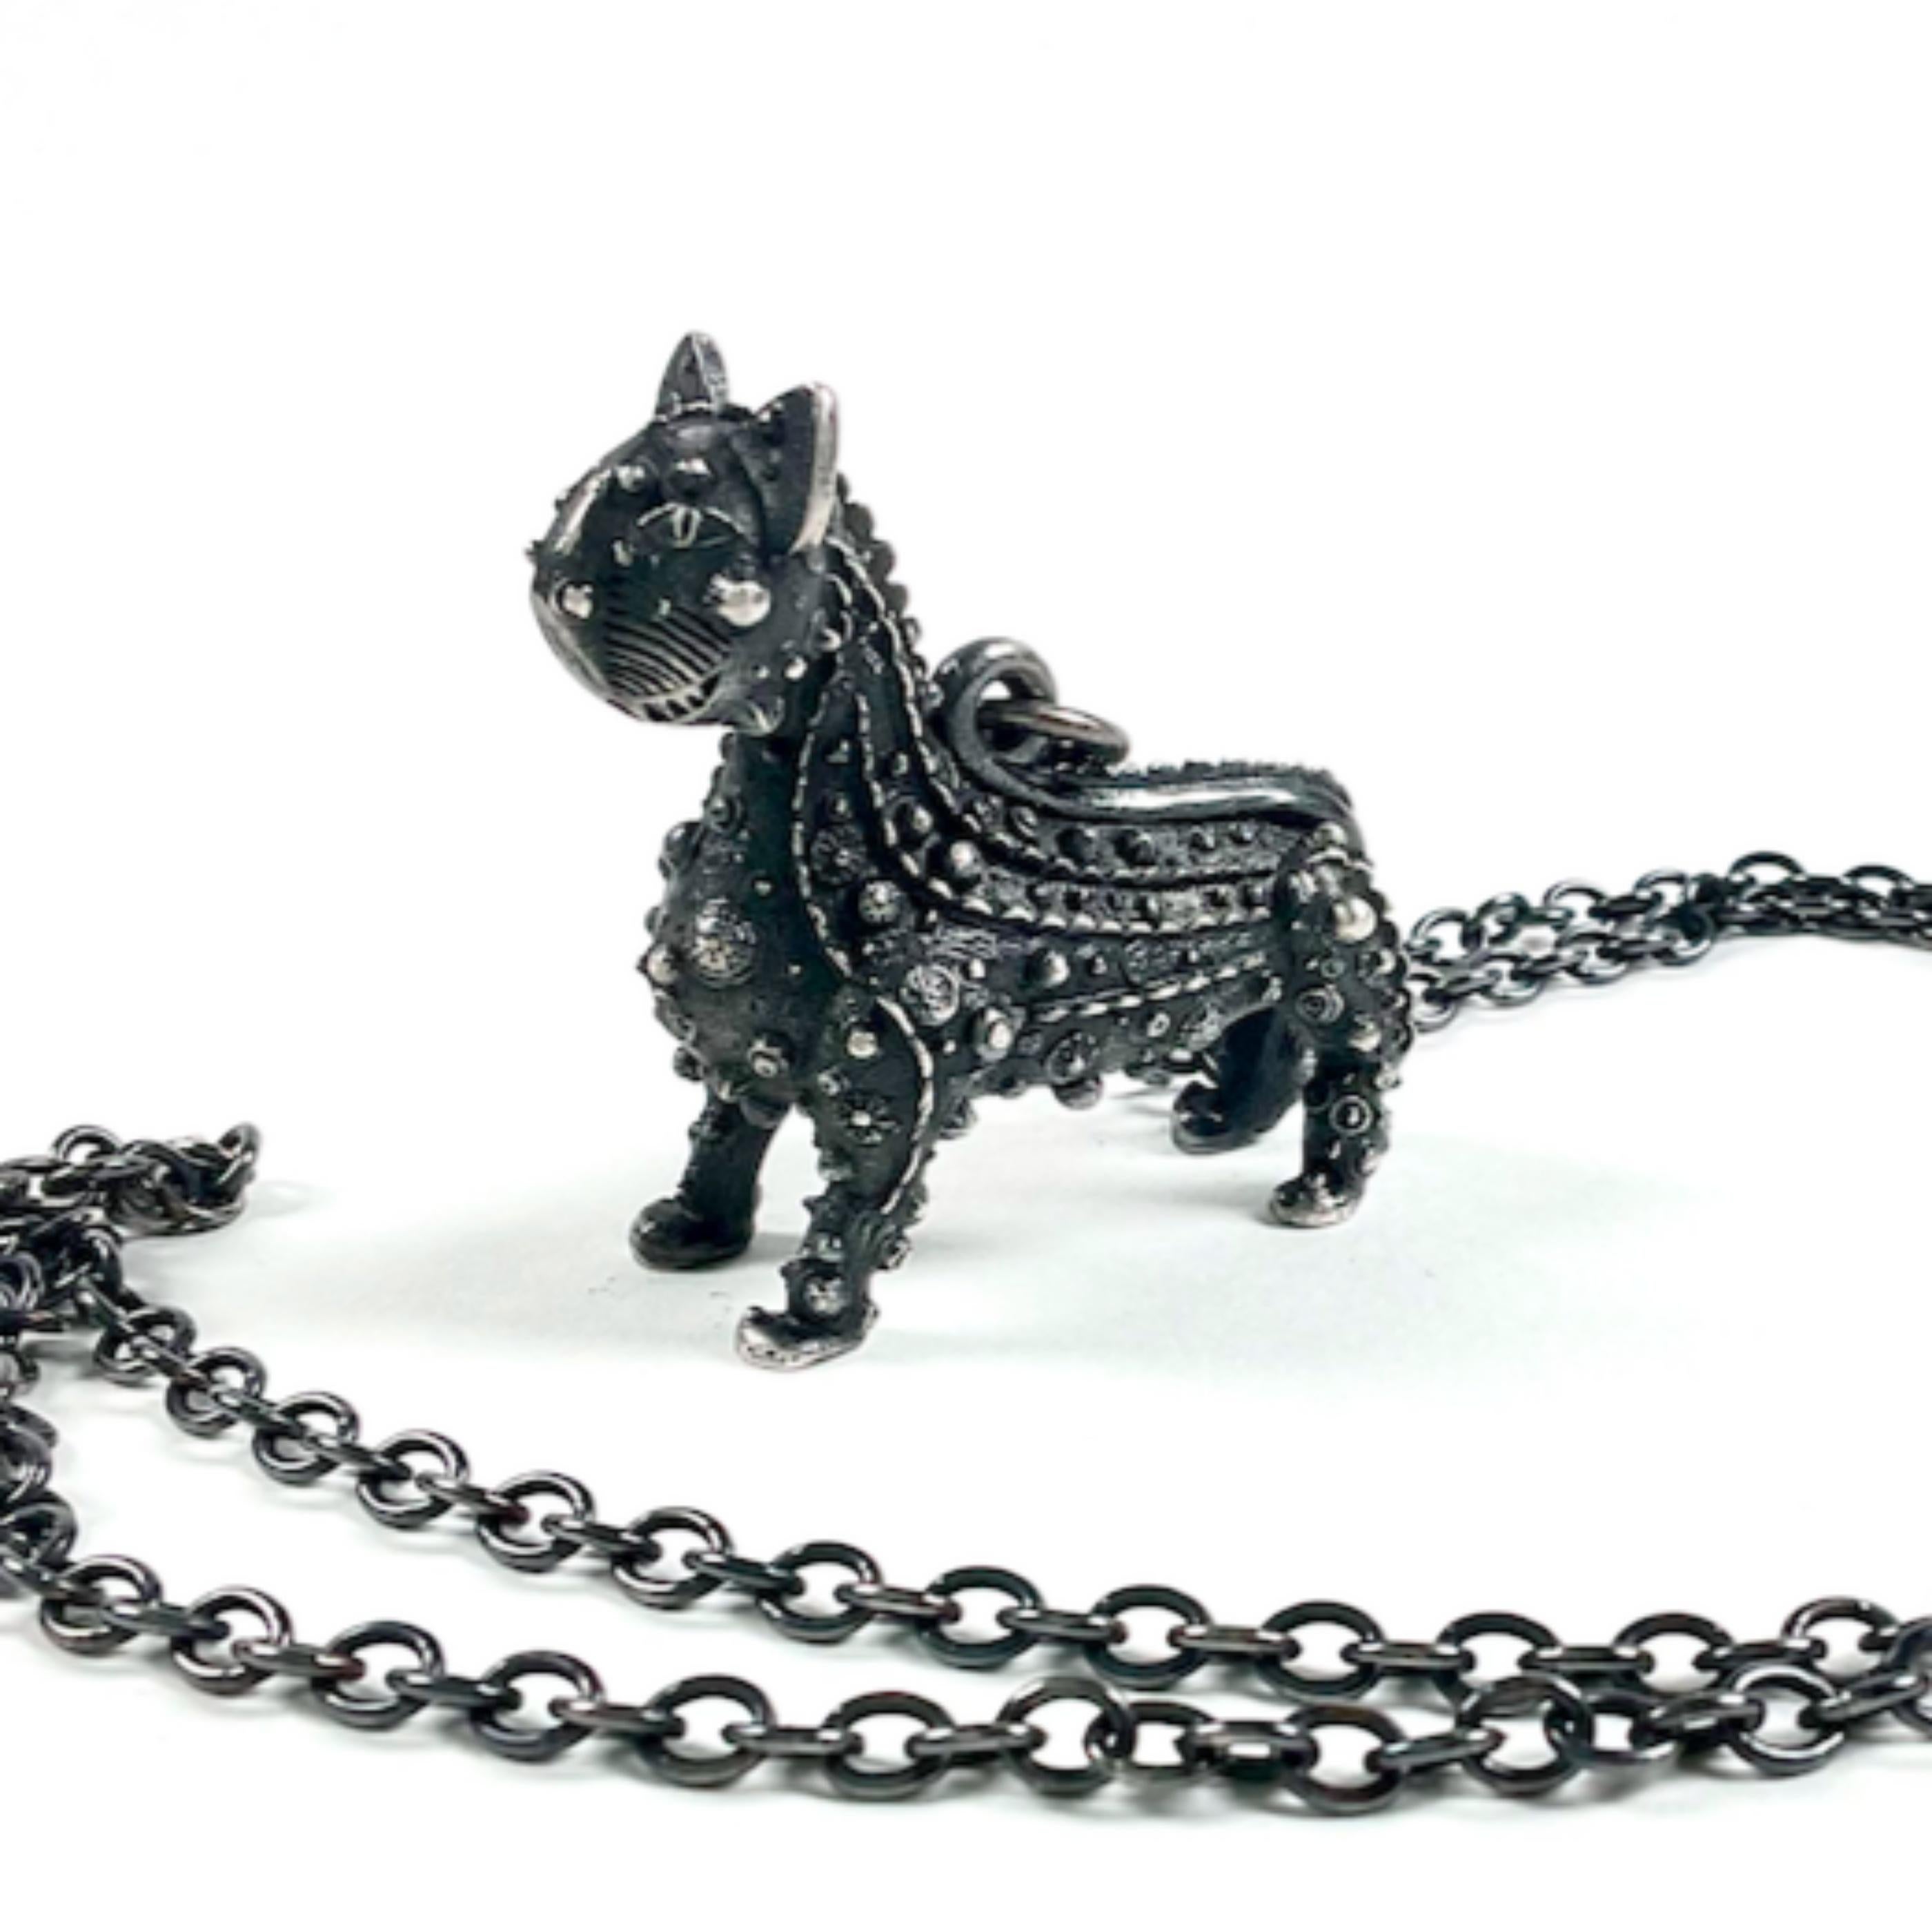 Grayson Perry
Chris Whitty's Cat, 2021
Solid sterling silver with oxidized finish and a 28